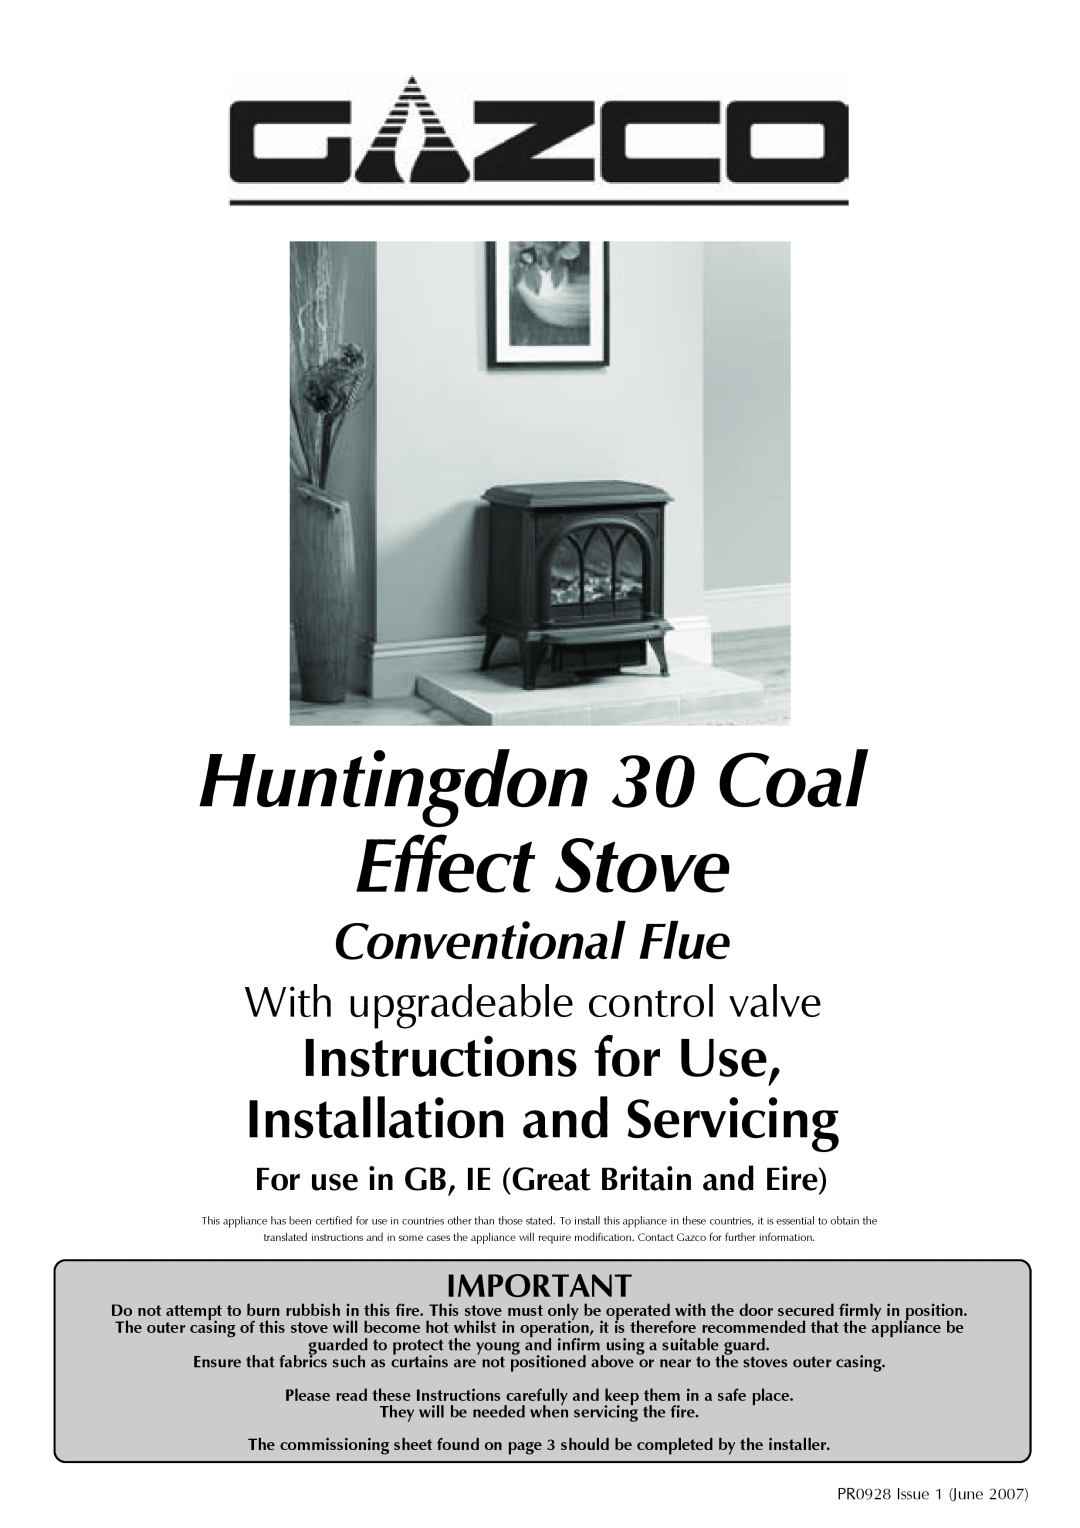 Stovax manual For use in GB, IE Great Britain and Eire, Huntingdon 30 Coal Effect Stove, Conventional Flue 